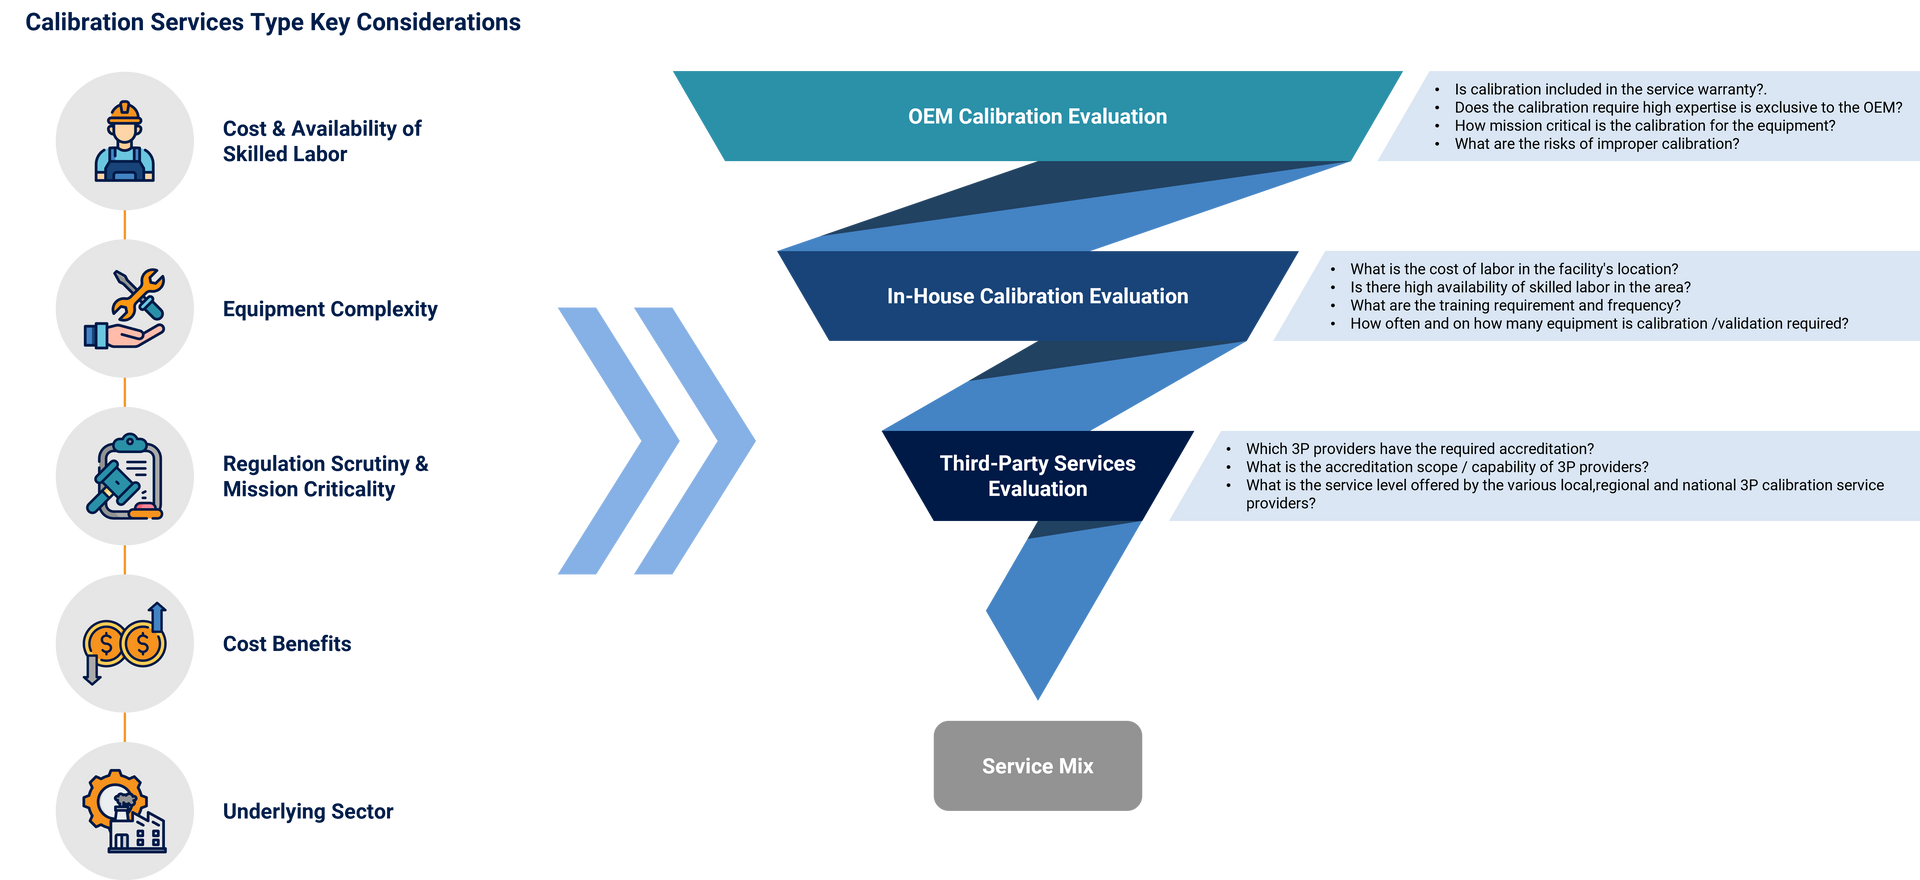 Calibration services type key considerations: a graphic showing a range of considerations such as cost and availability of skilled labor, equipment complexity, regulation scrutiny/mission criticality, cost benefits, and underlying sectors. The graphic also shows the funnel of evaluation from OEM calibration to in-house calibration to third-party services evaluation. The graphic also includes types of questions evaluators may ask. 